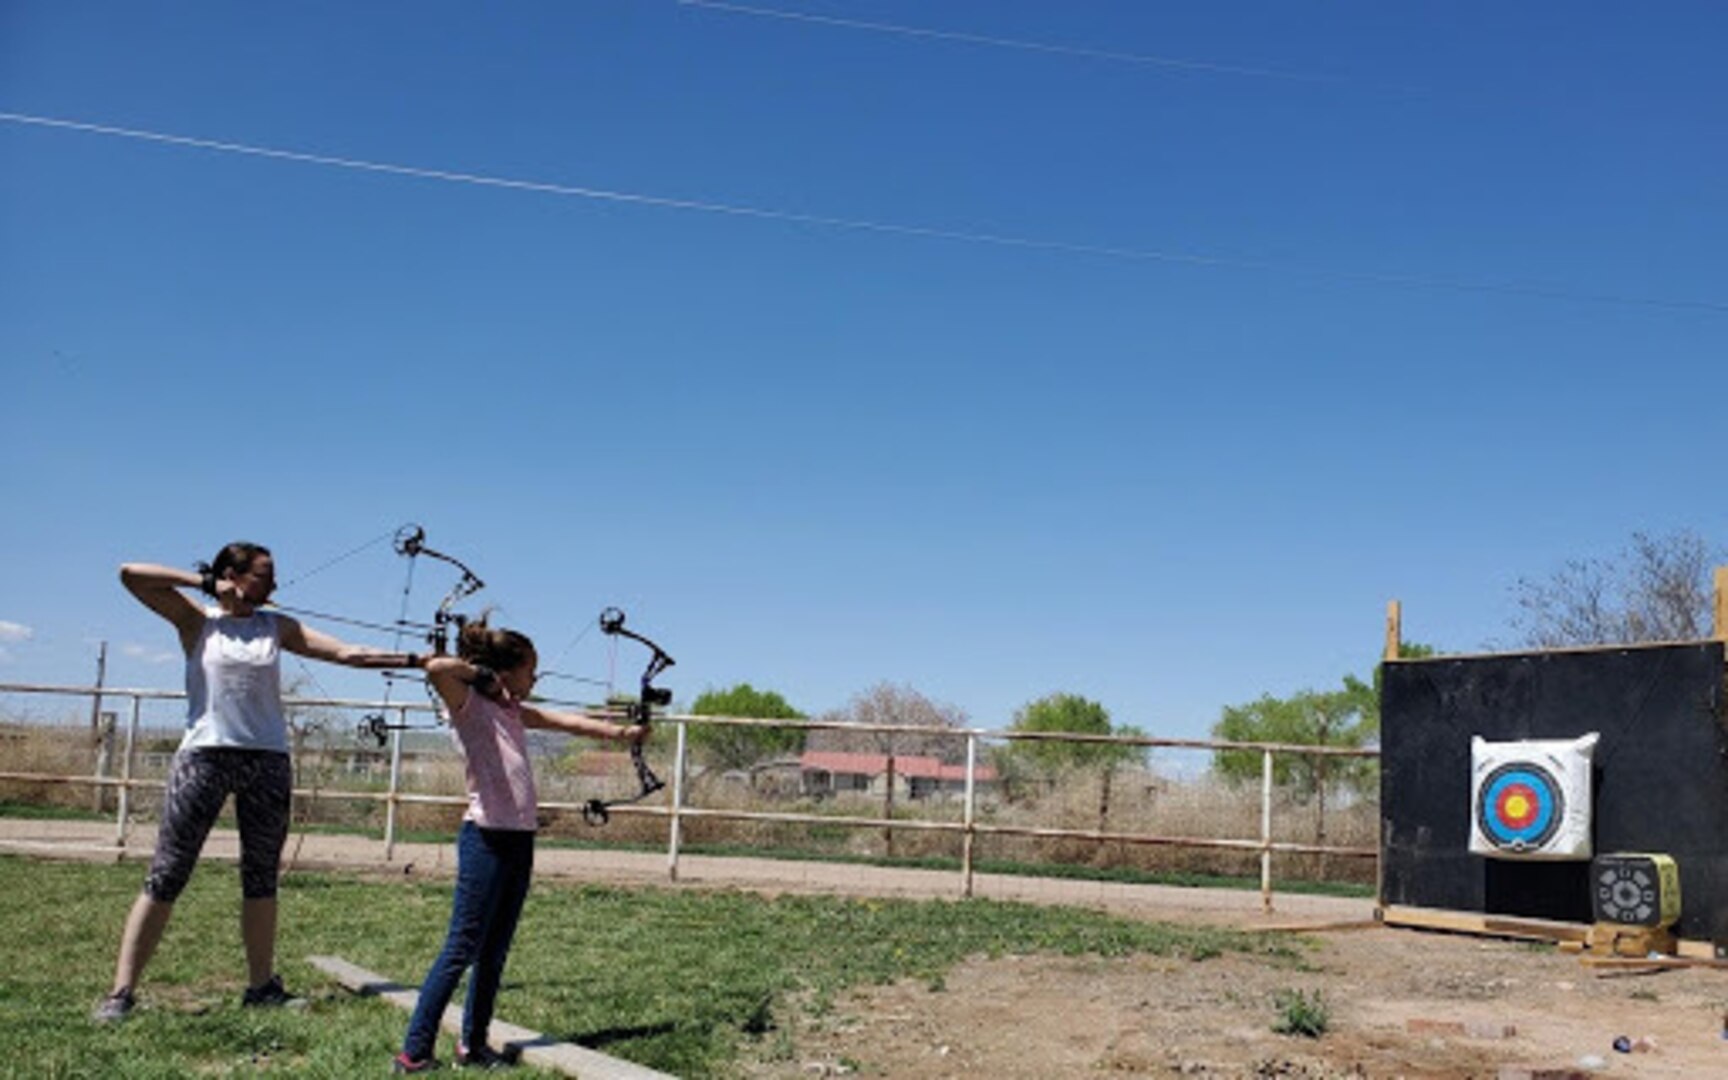 Master Sgt. Marci Montoya of the New Mexico National Guard practices archery with family at home to help stay resilient during the COVID-19 pandemic.